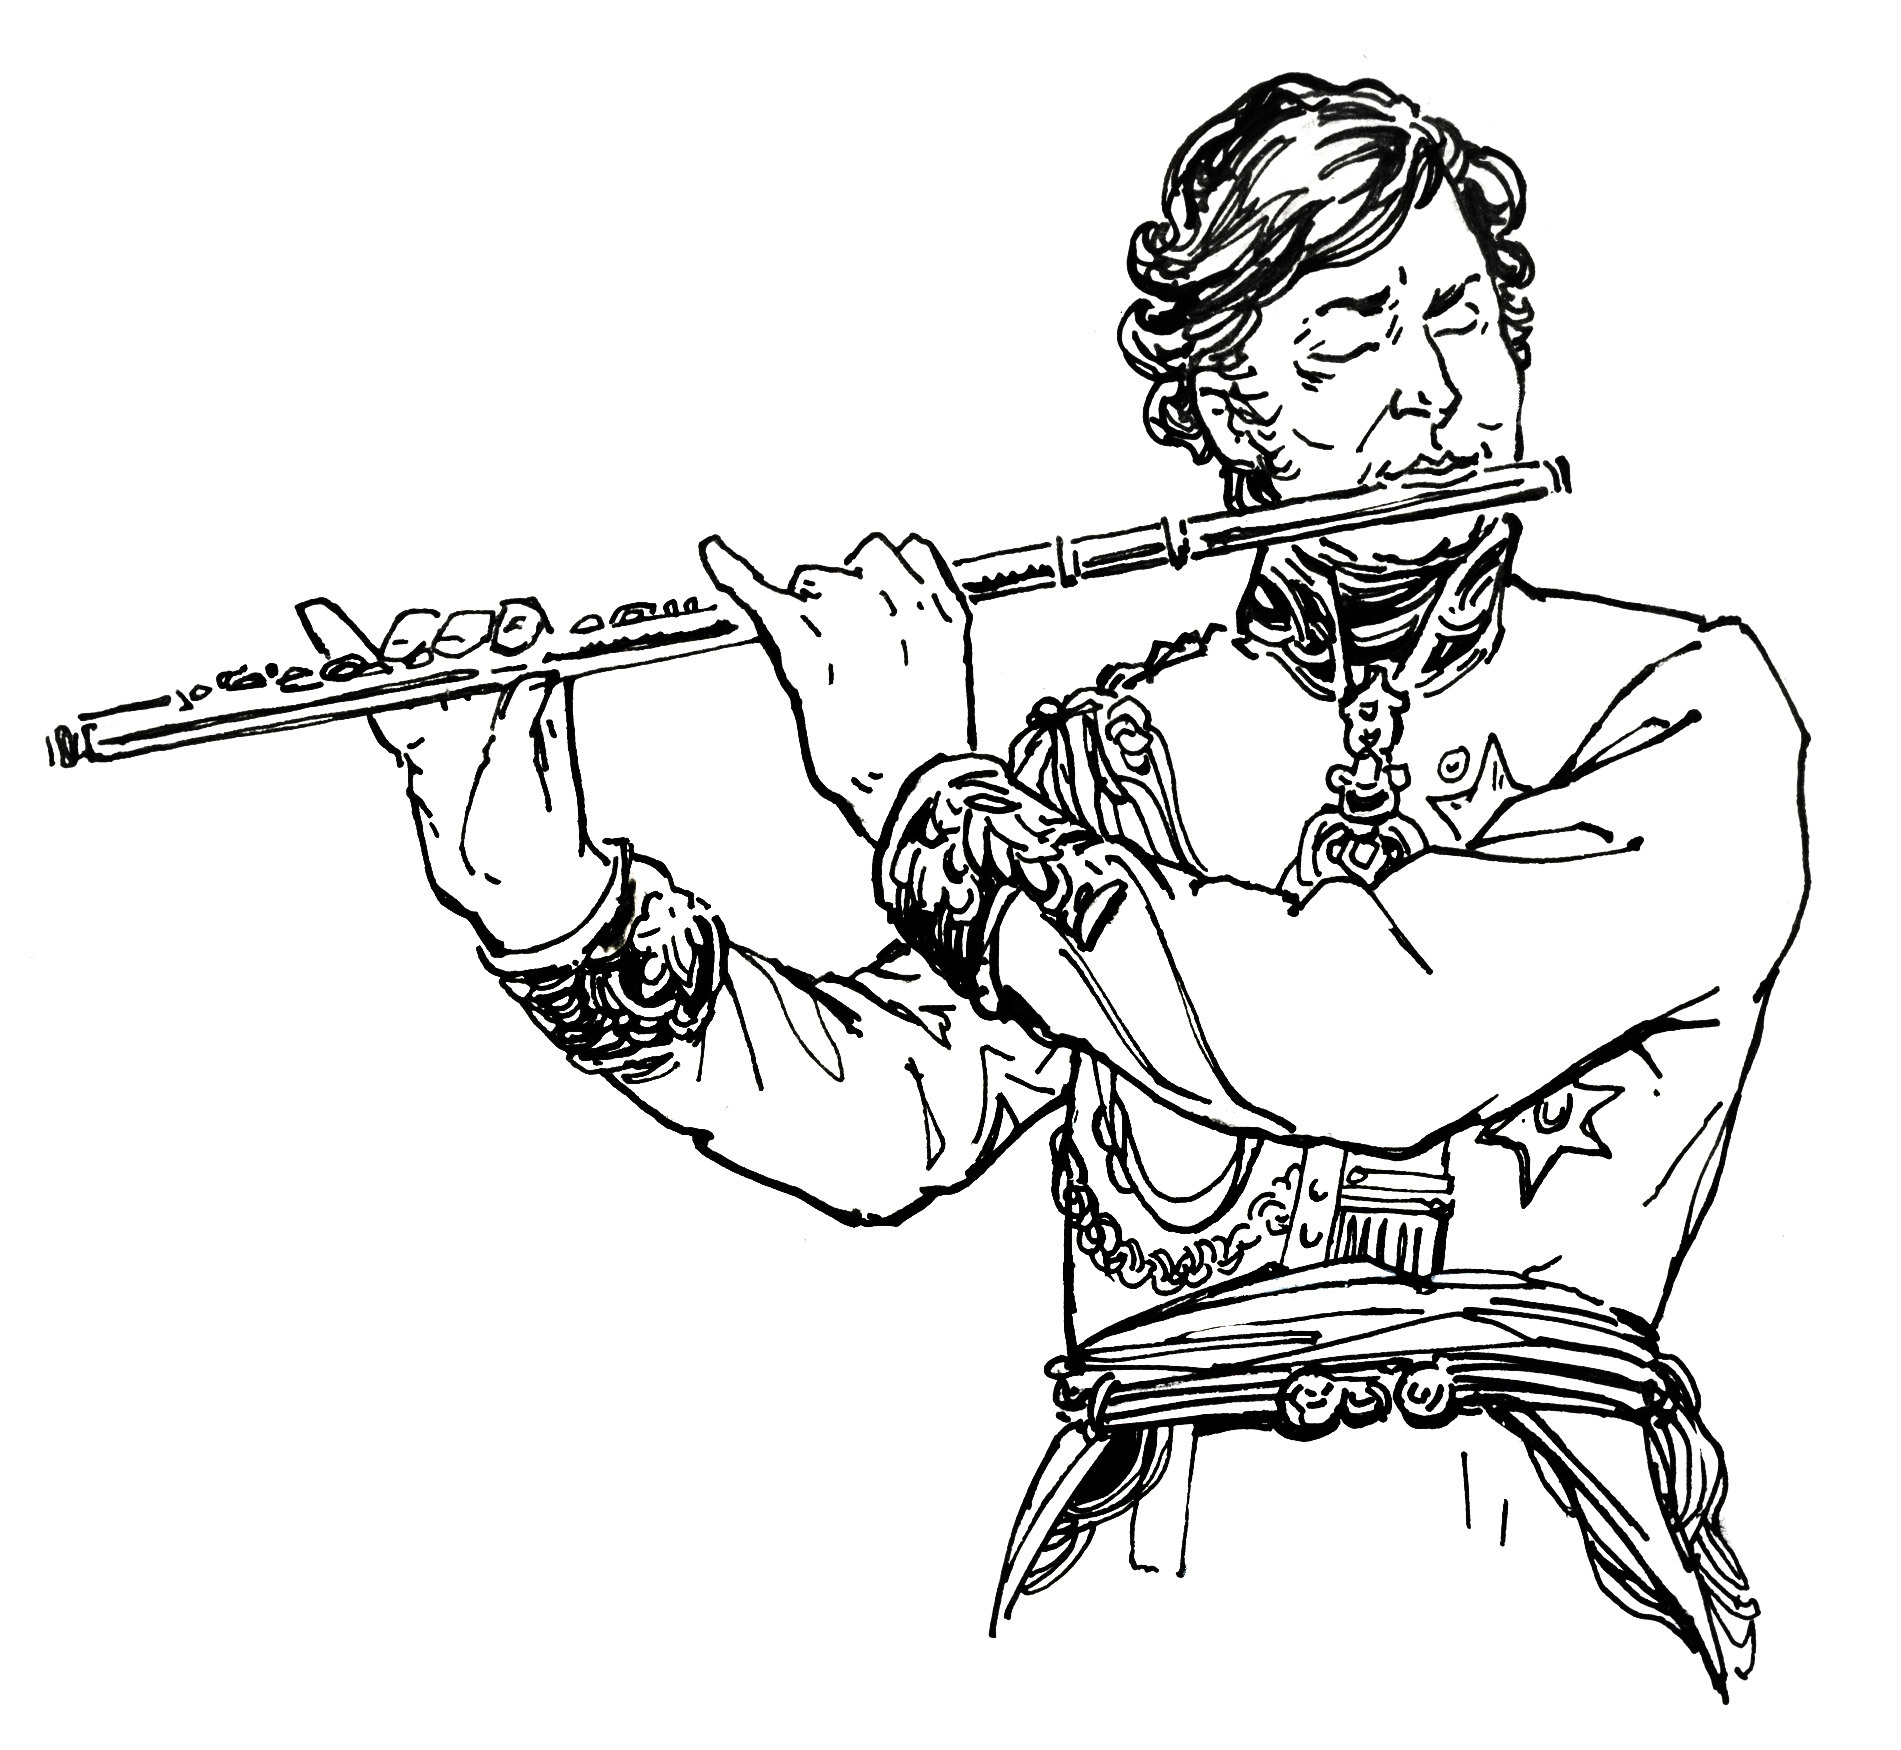 Prince regent playing flute